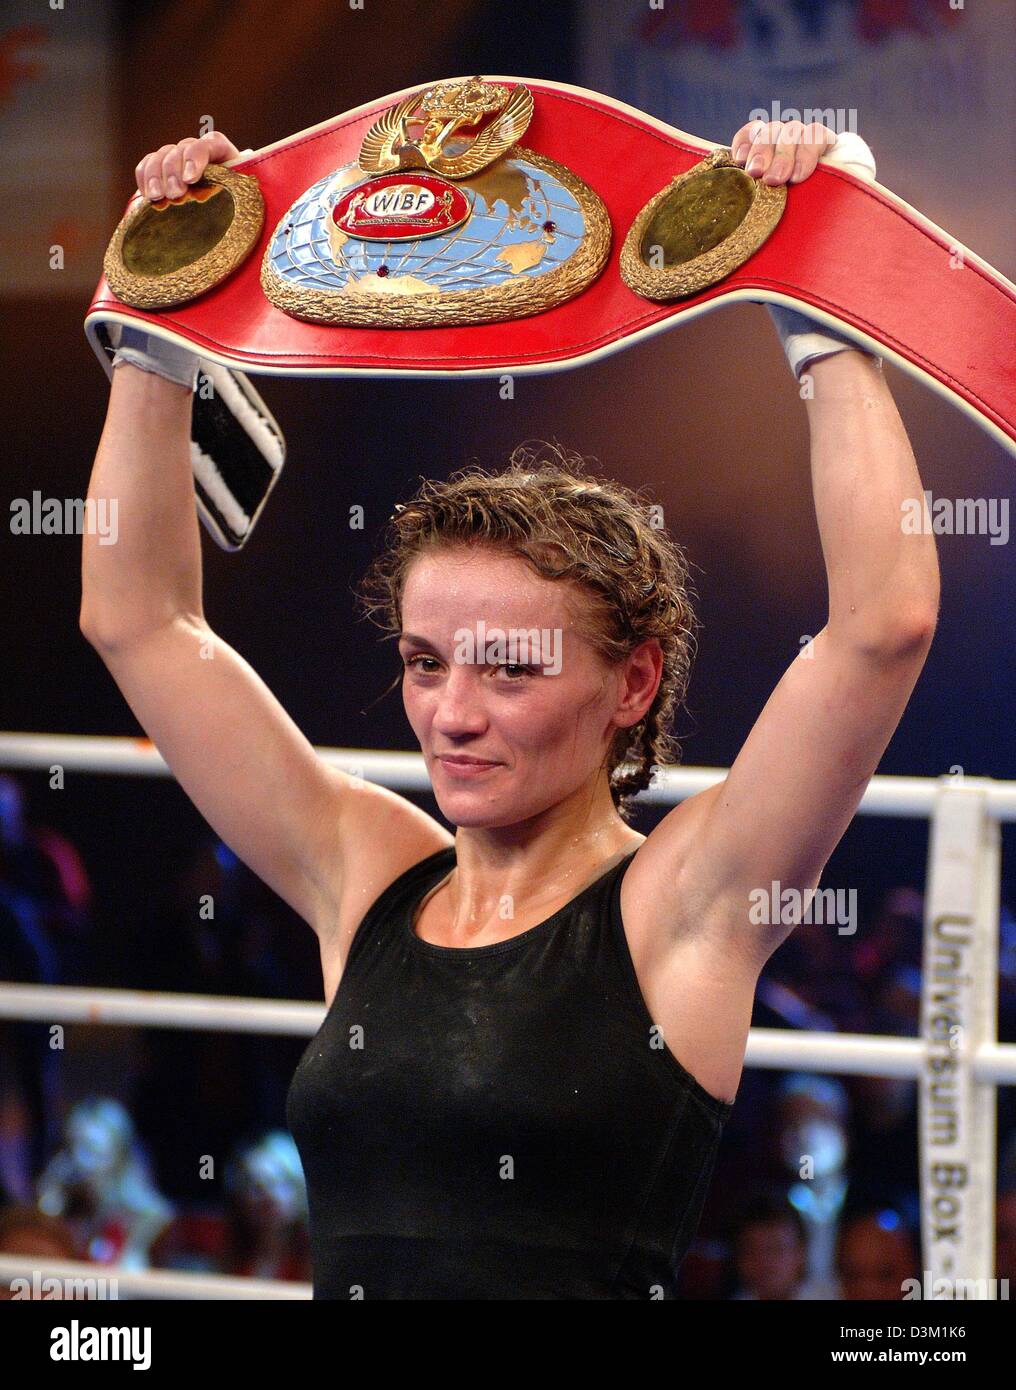 (dpa) - German boxer Ina Menzer (Moenchengladbach) shows the WIBF featherweight champion belt after her fight vs titleholder Silke Weikenmeier (Speyer) in the sport hall Branberge in Halle, Germany, 22 October 2005. The 24-year-old Menzer of the Universum scion Spotlight won the fight after 10 rounds to points and secured the WIBF belt in her eleventh victorious fight. Photo: Peter Stock Photo